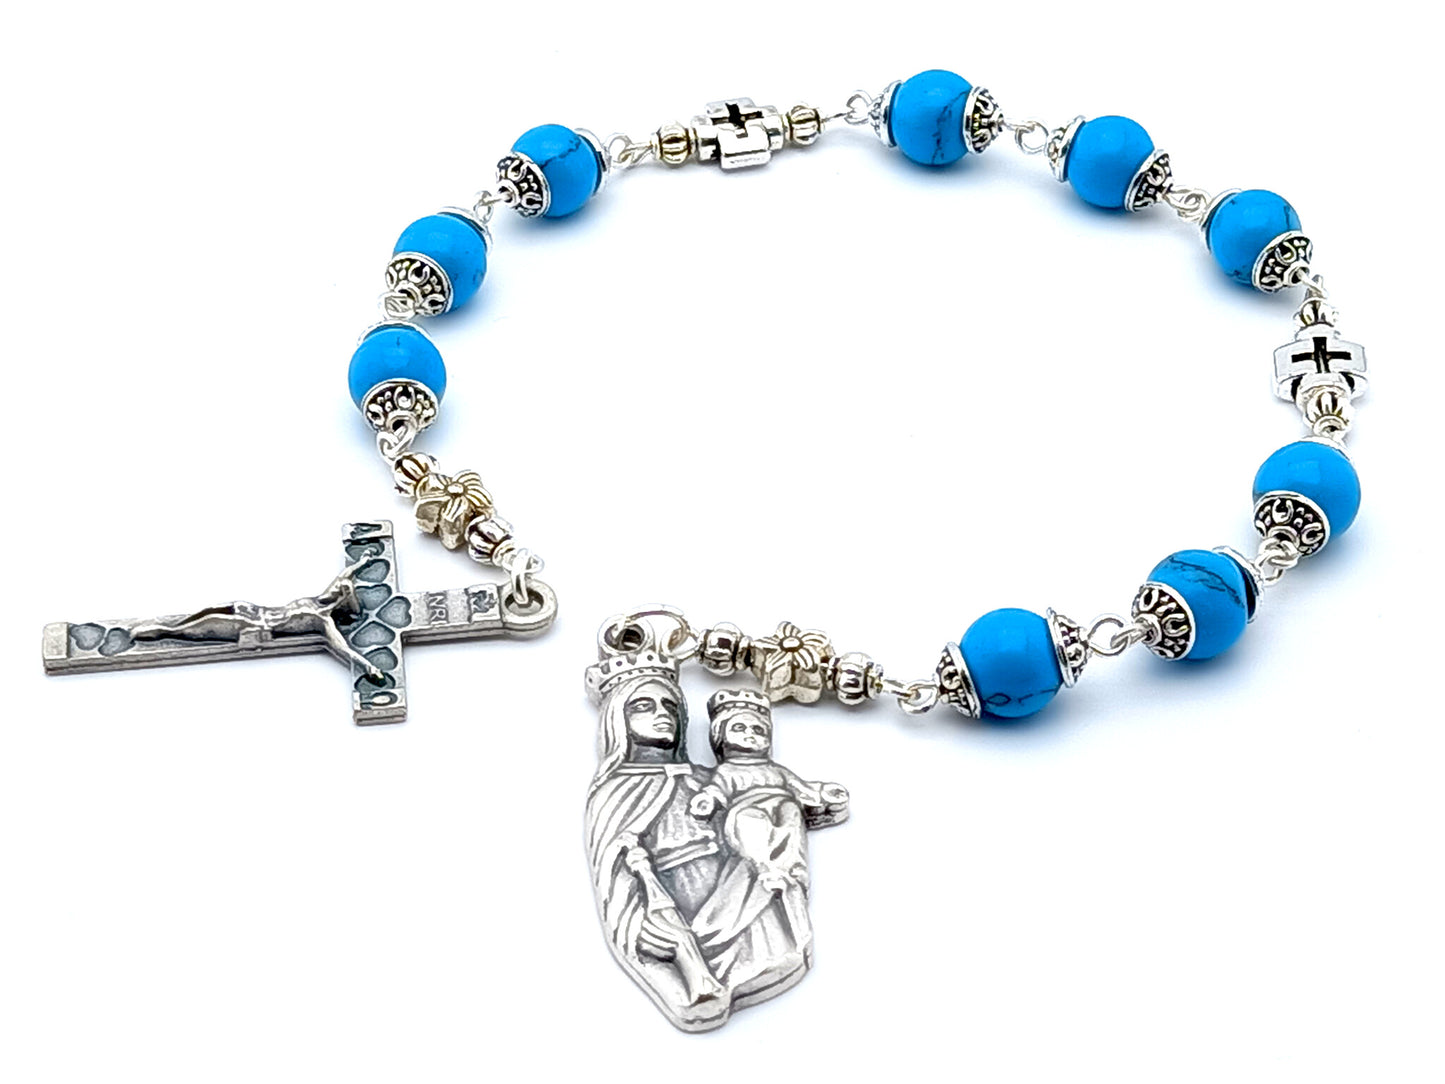 Our Lady of Mount Carmel unique rosary beads prayer chaplet with turquoise gemstone and silver cross beads, silver heart crucifix and end medal.